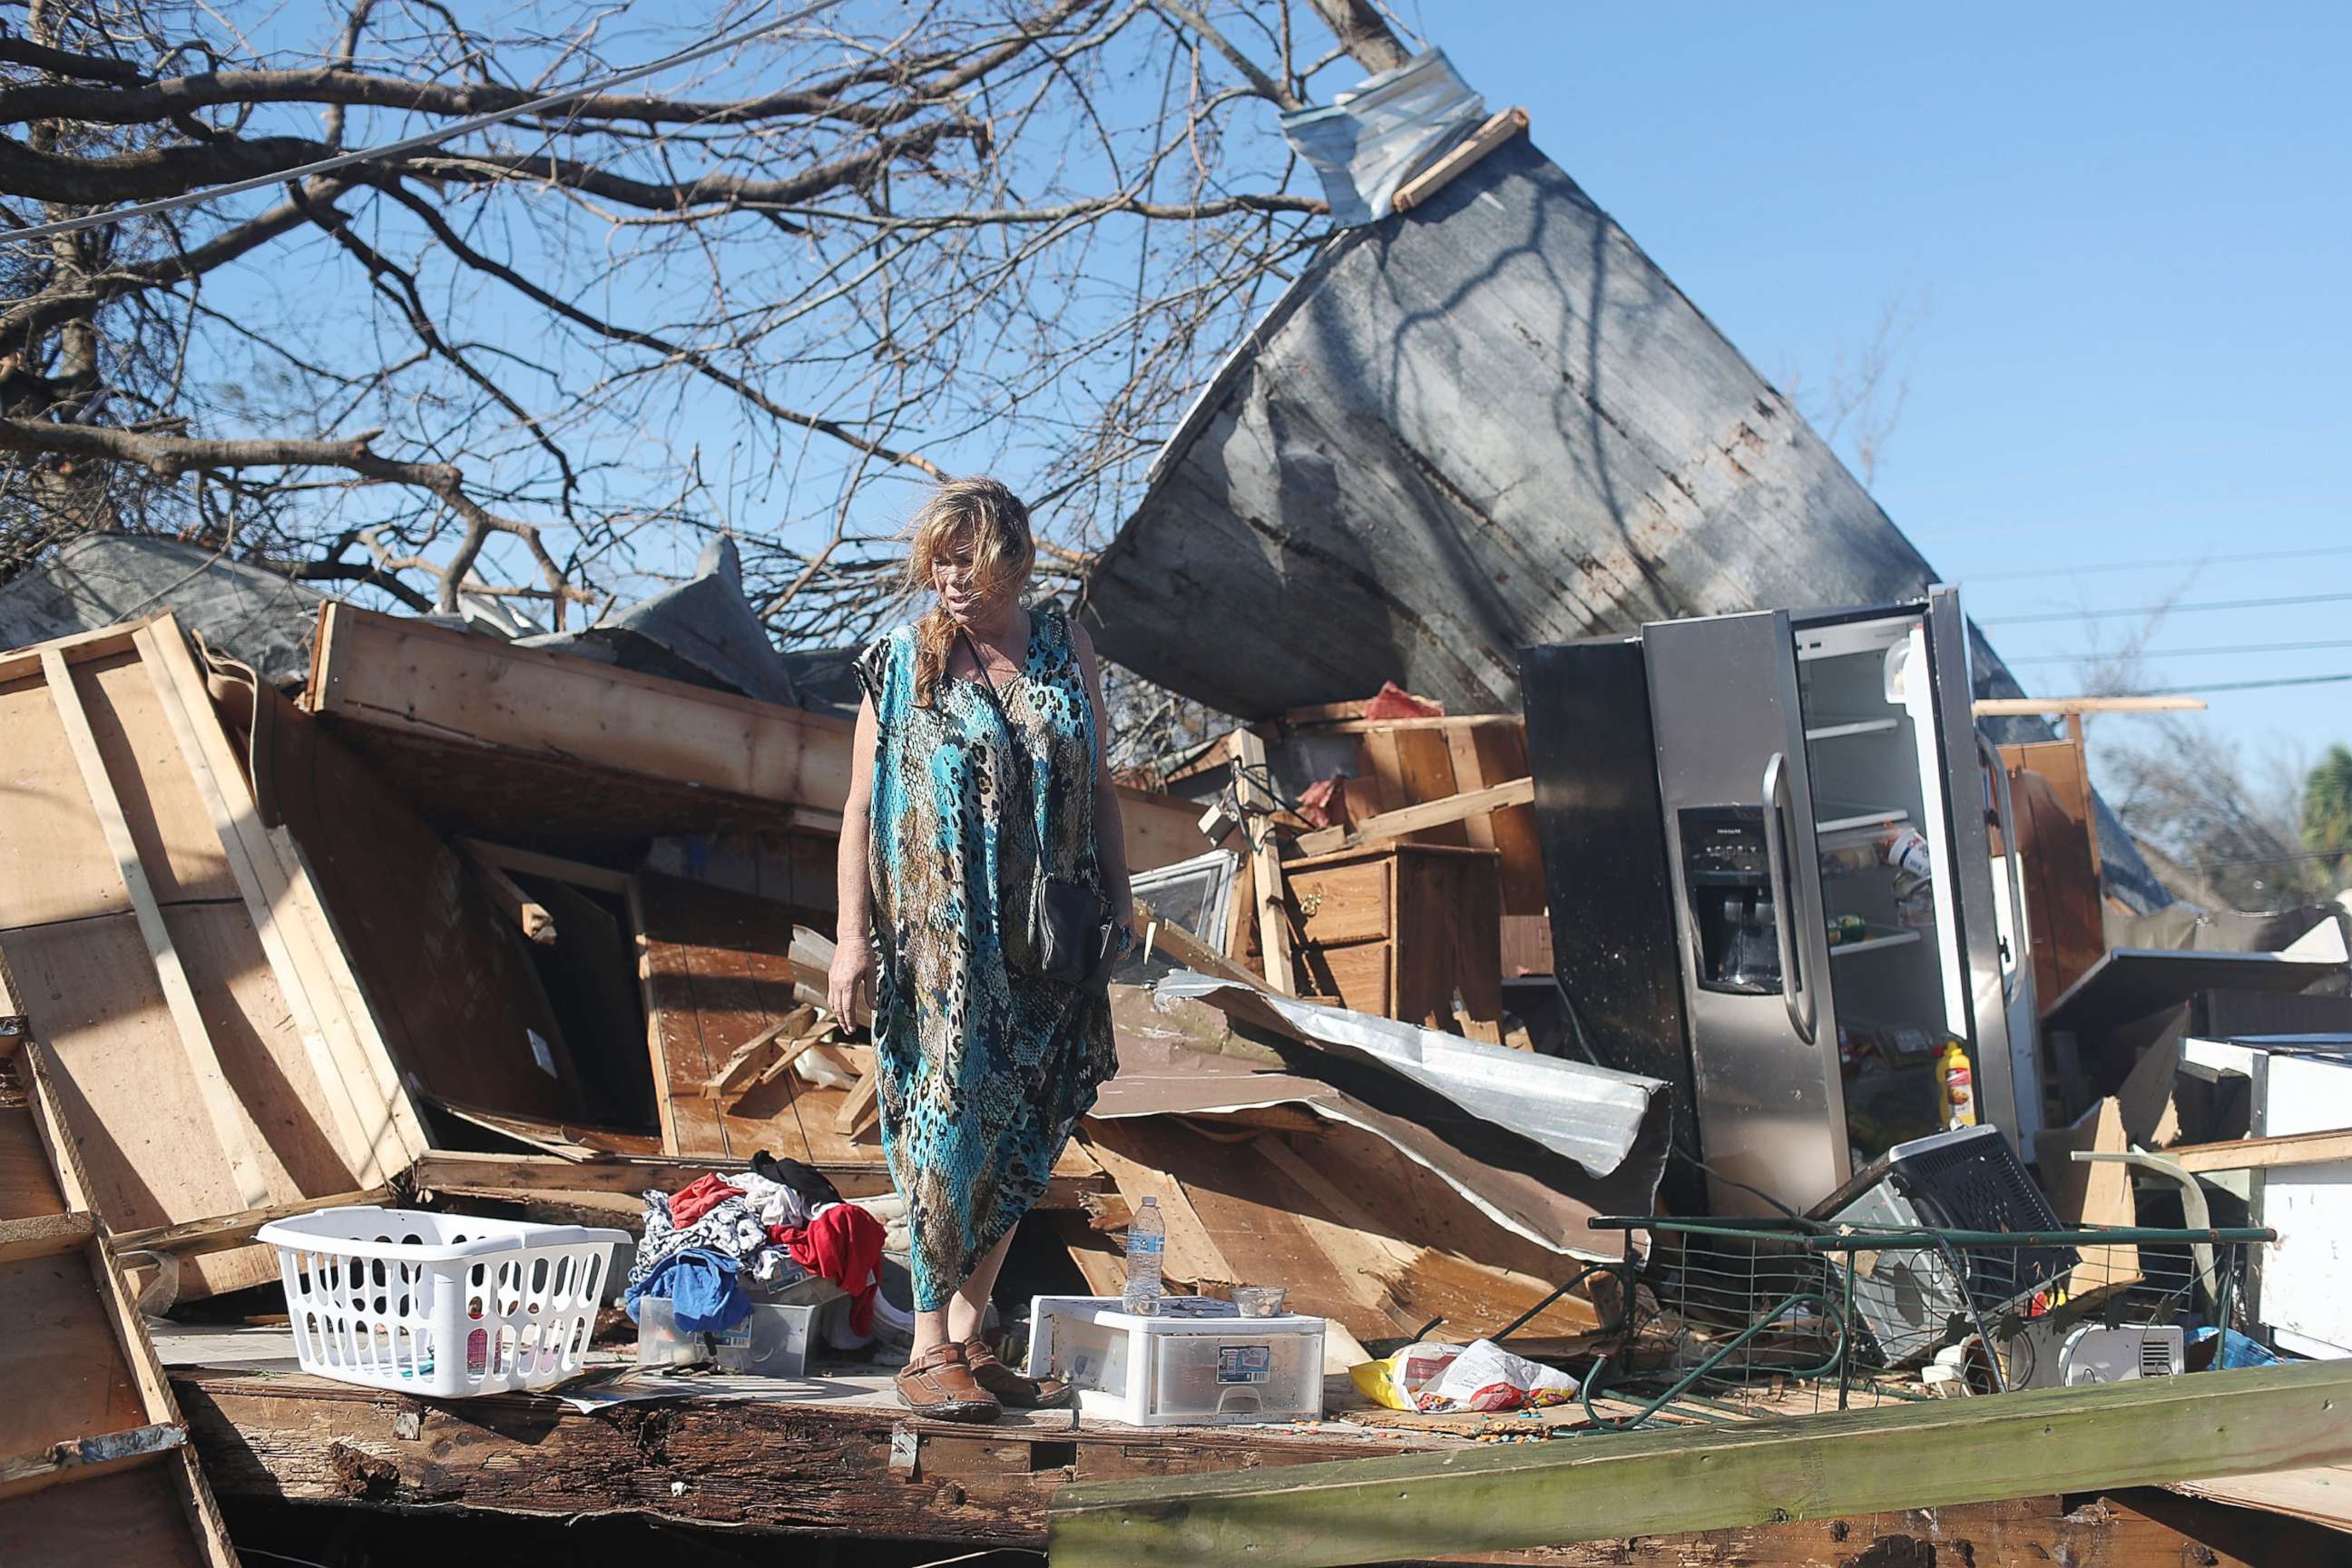 PHOTO: Kathy Coy stands among what is left of her home after Hurricane Michael destroyed it on Oct. 11, 2018 in Panama City, Florida. She said she was in the home when it was blown apart and is thankful to be alive. 